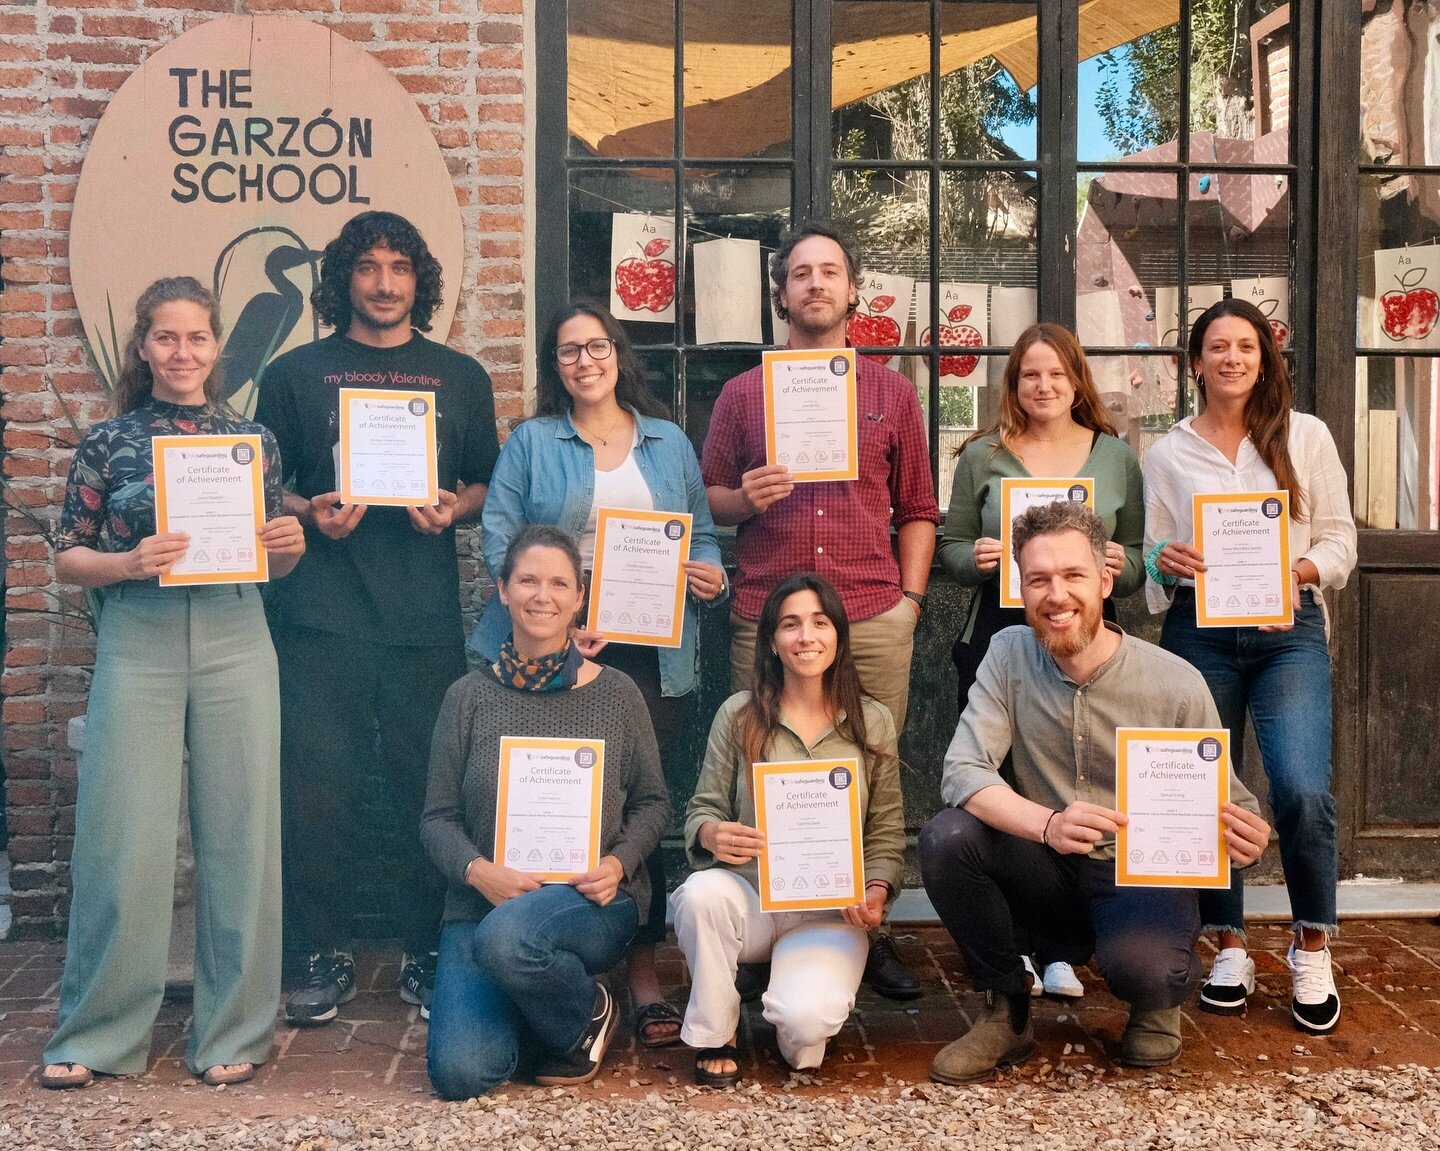 We&rsquo;re excited to share that our entire team &mdash; half of whom are photographed above &mdash; has successfully completed the ChildSafeguarding.com Fundamental Child Protection Training for Educators. 👏🏼

Committed to being at the forefront 